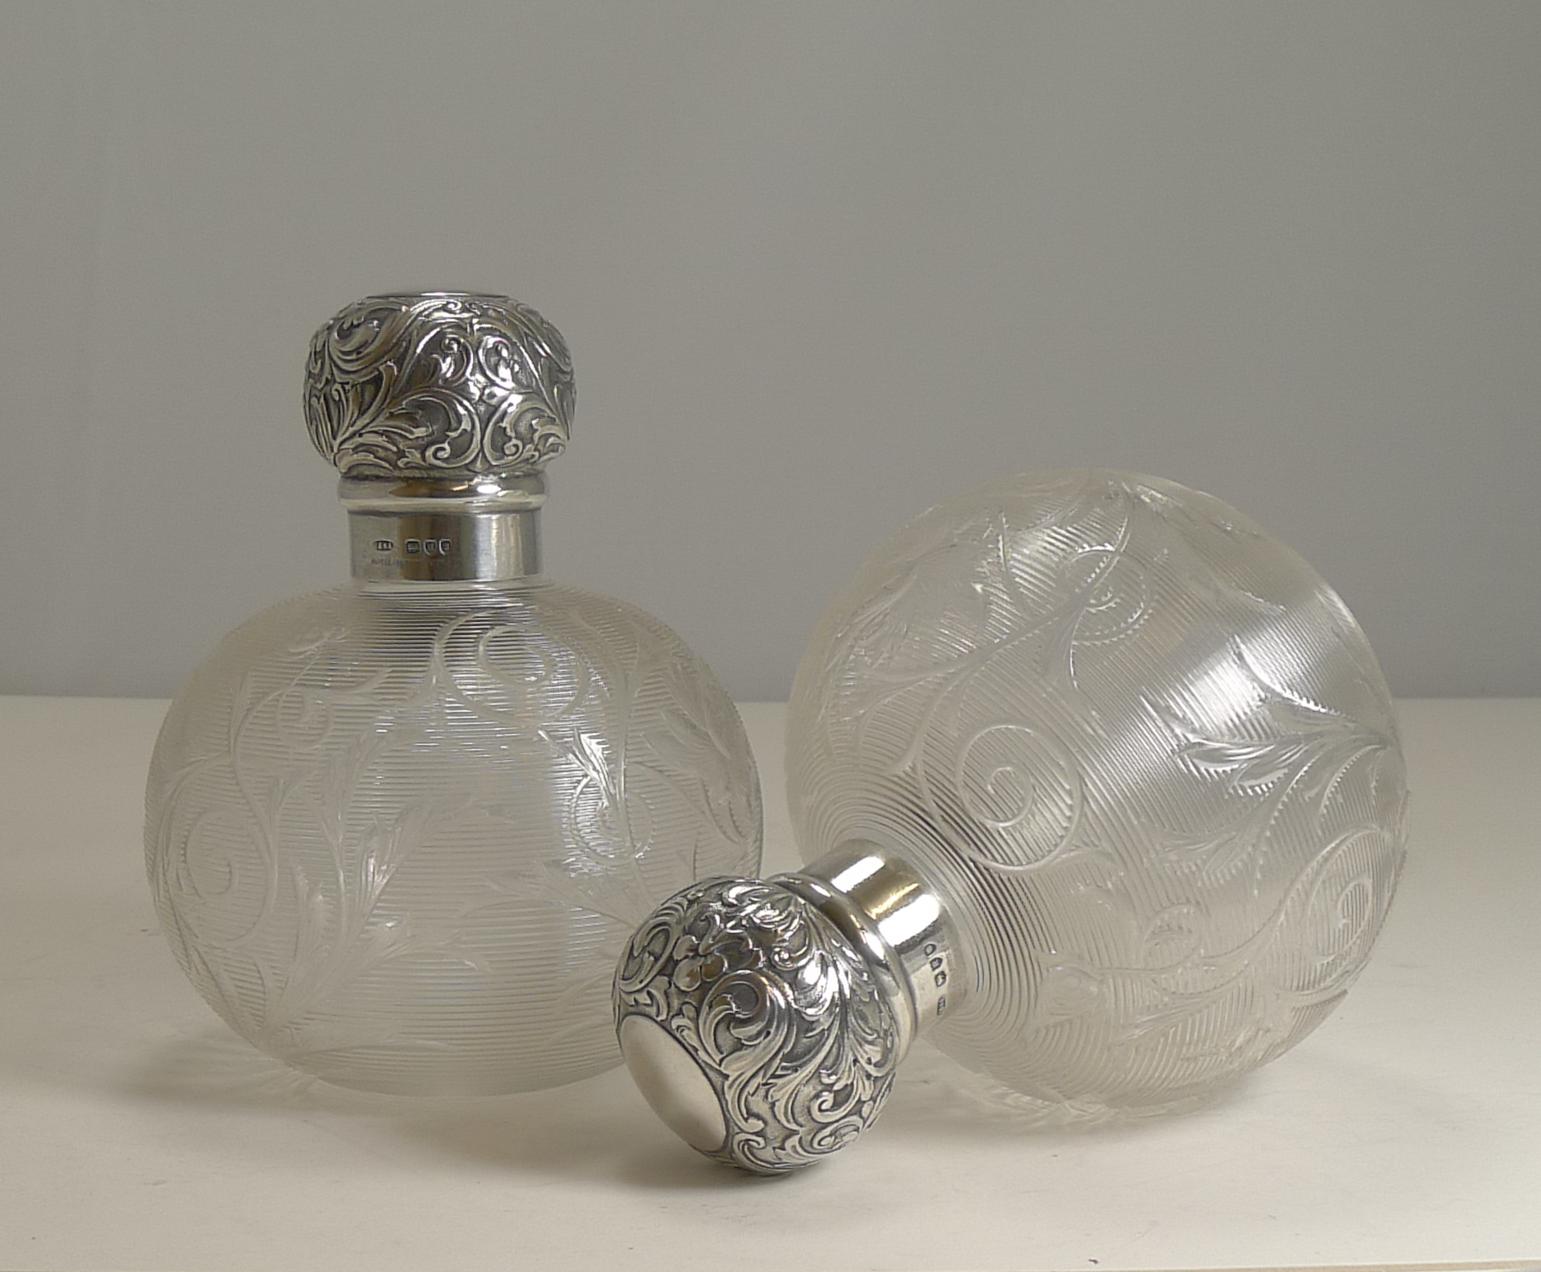 A rare and very fine pair of late Victorian perfume / scent bottles by the top-notch luxury retailer, Asprey of Bond St., London.

The glass is very, very unusual created from threaded glass which in turn has been beautifully hand engraved clear